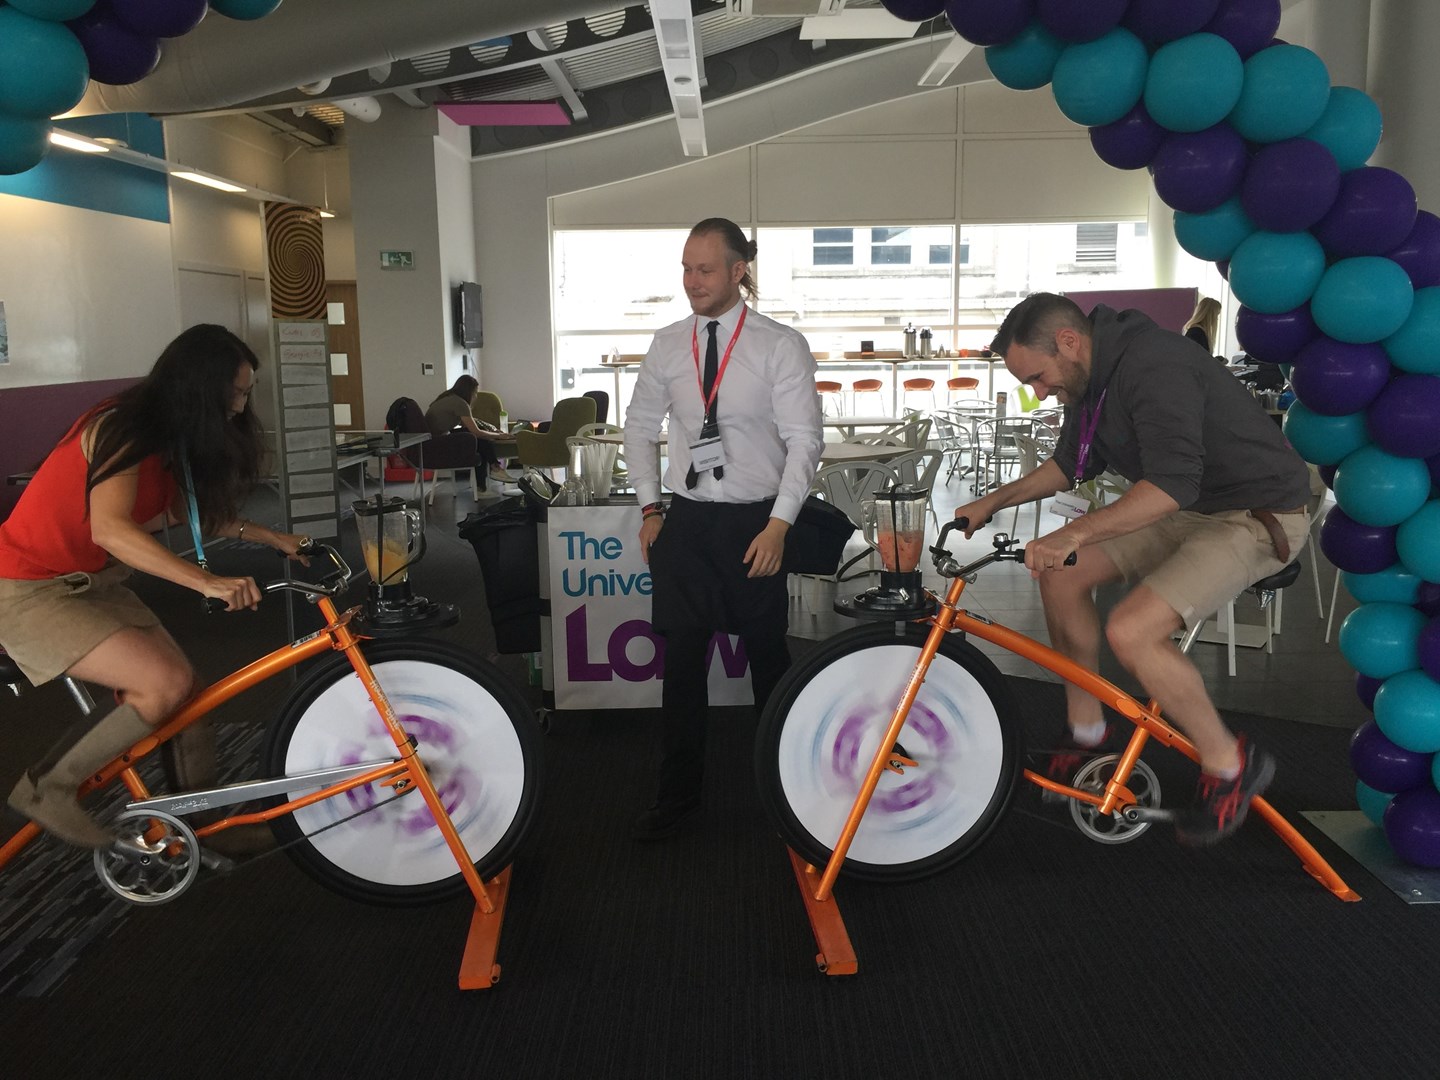 University of Law Leeds students compete on a smoothie bike challenge during Wellbeing Week